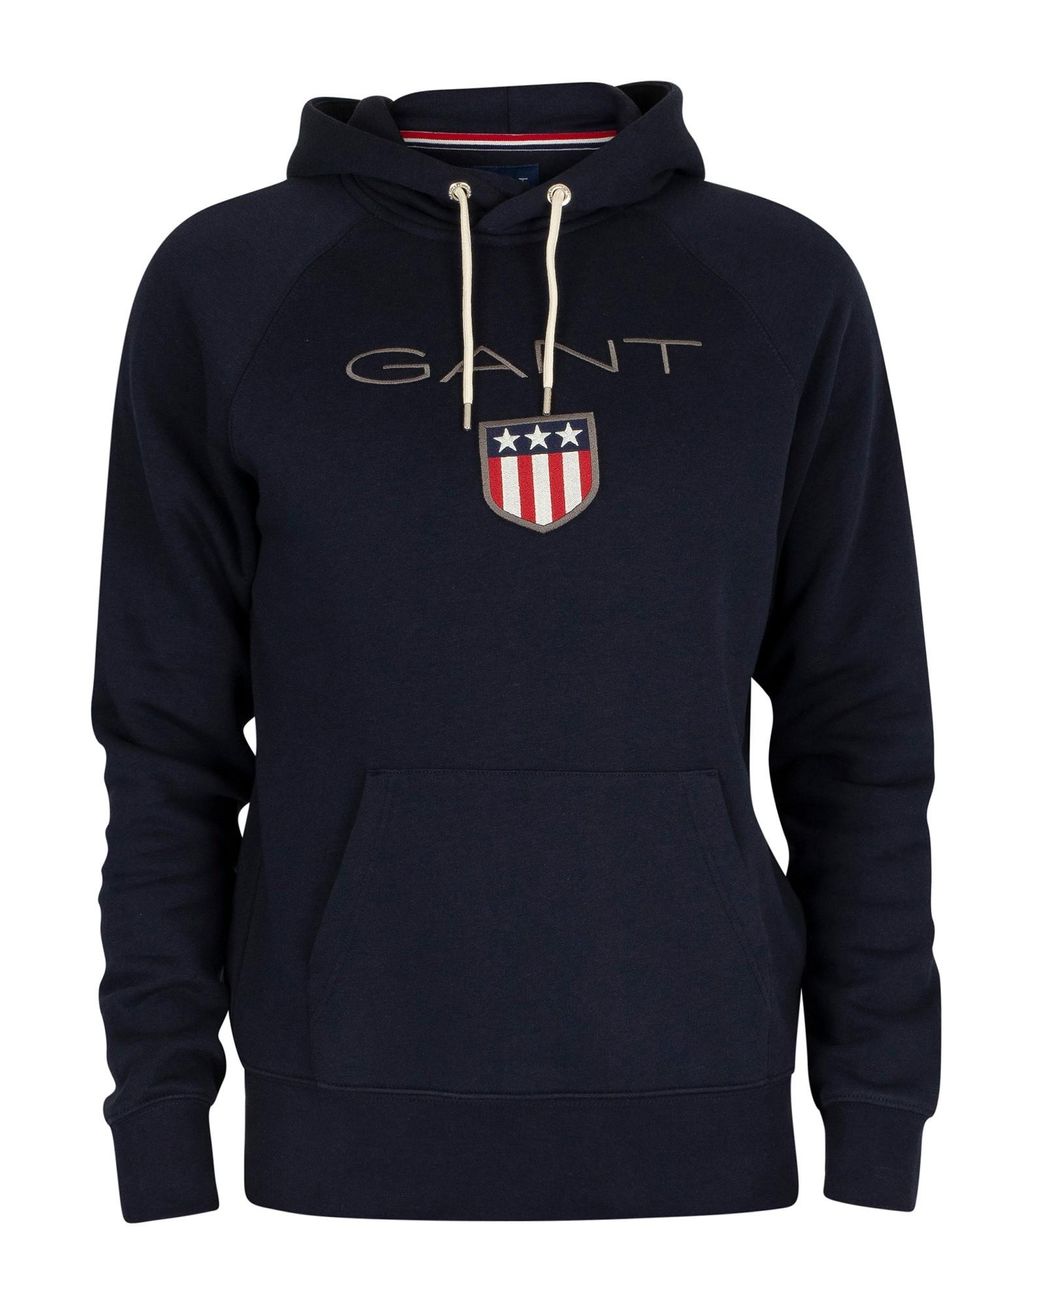 GANT Cotton Shield Hoodie in Blue for Men - Save 34% - Lyst